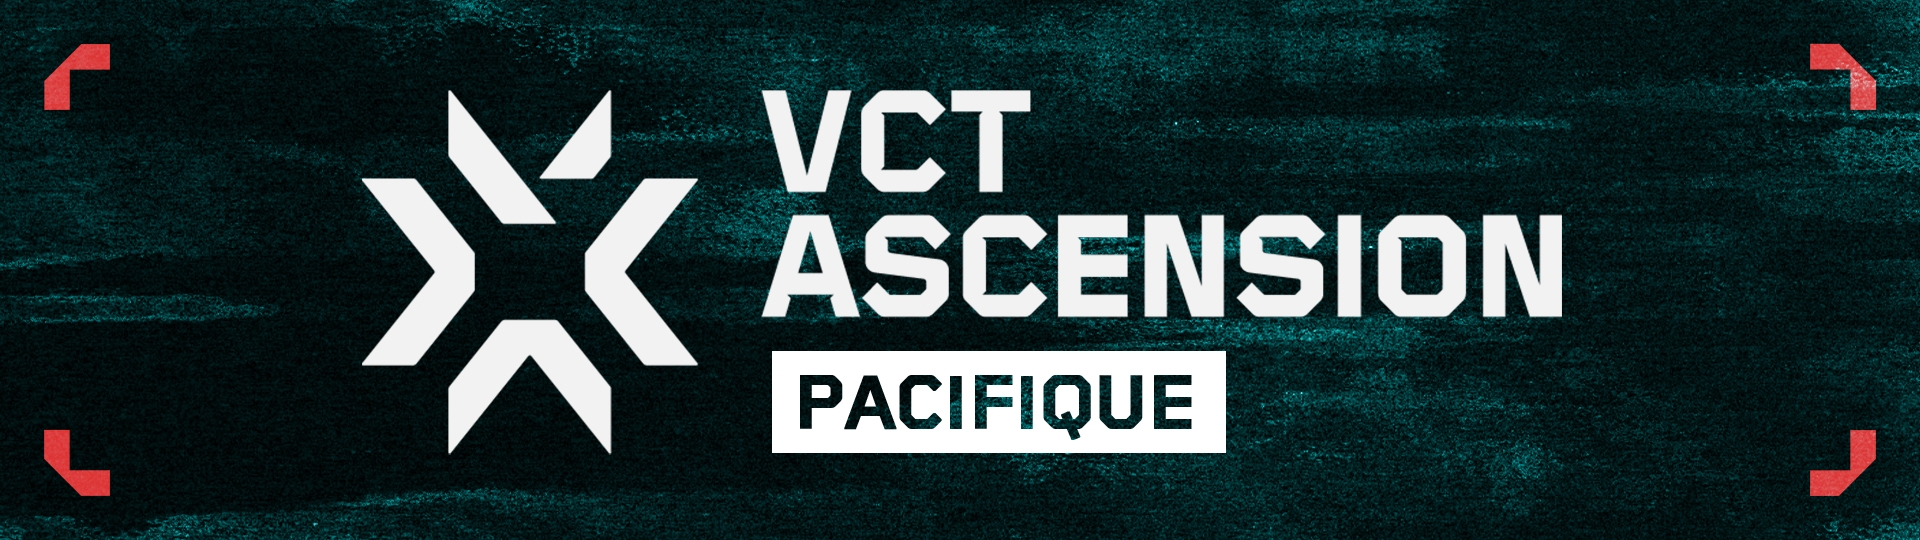 4._ASCENSION_PACIFIC_GRAPHIC_FR.jpg